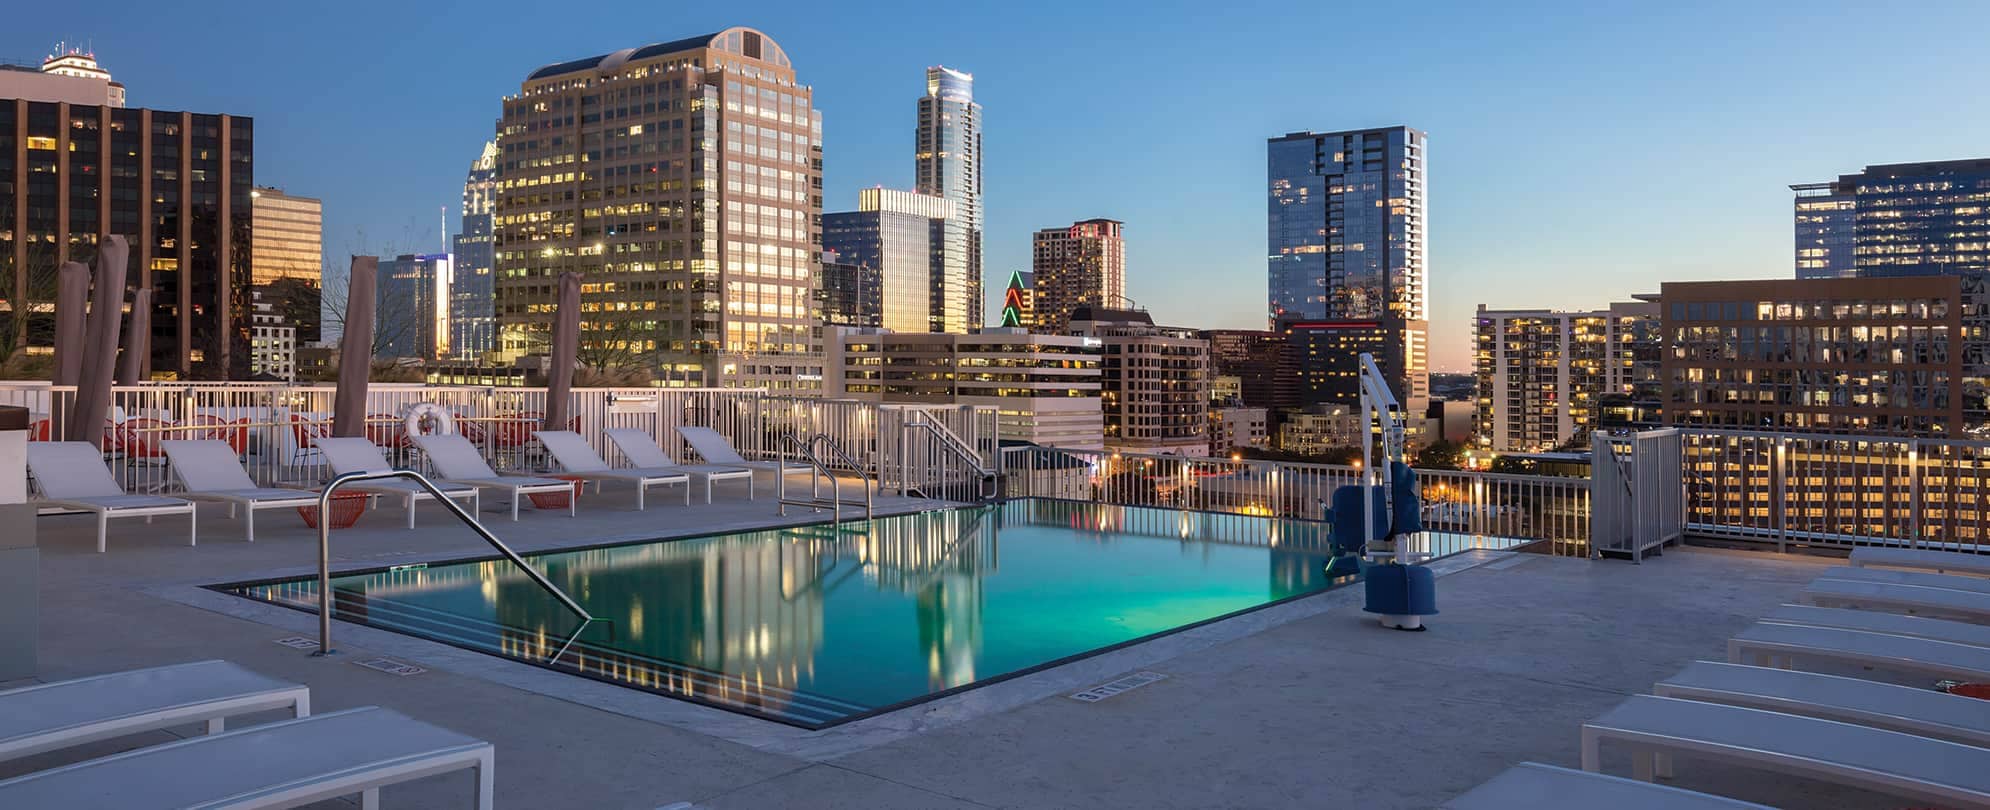 The rooftop pool and lounge area during sunset at Club Wyndham Austin in Austin, Texas